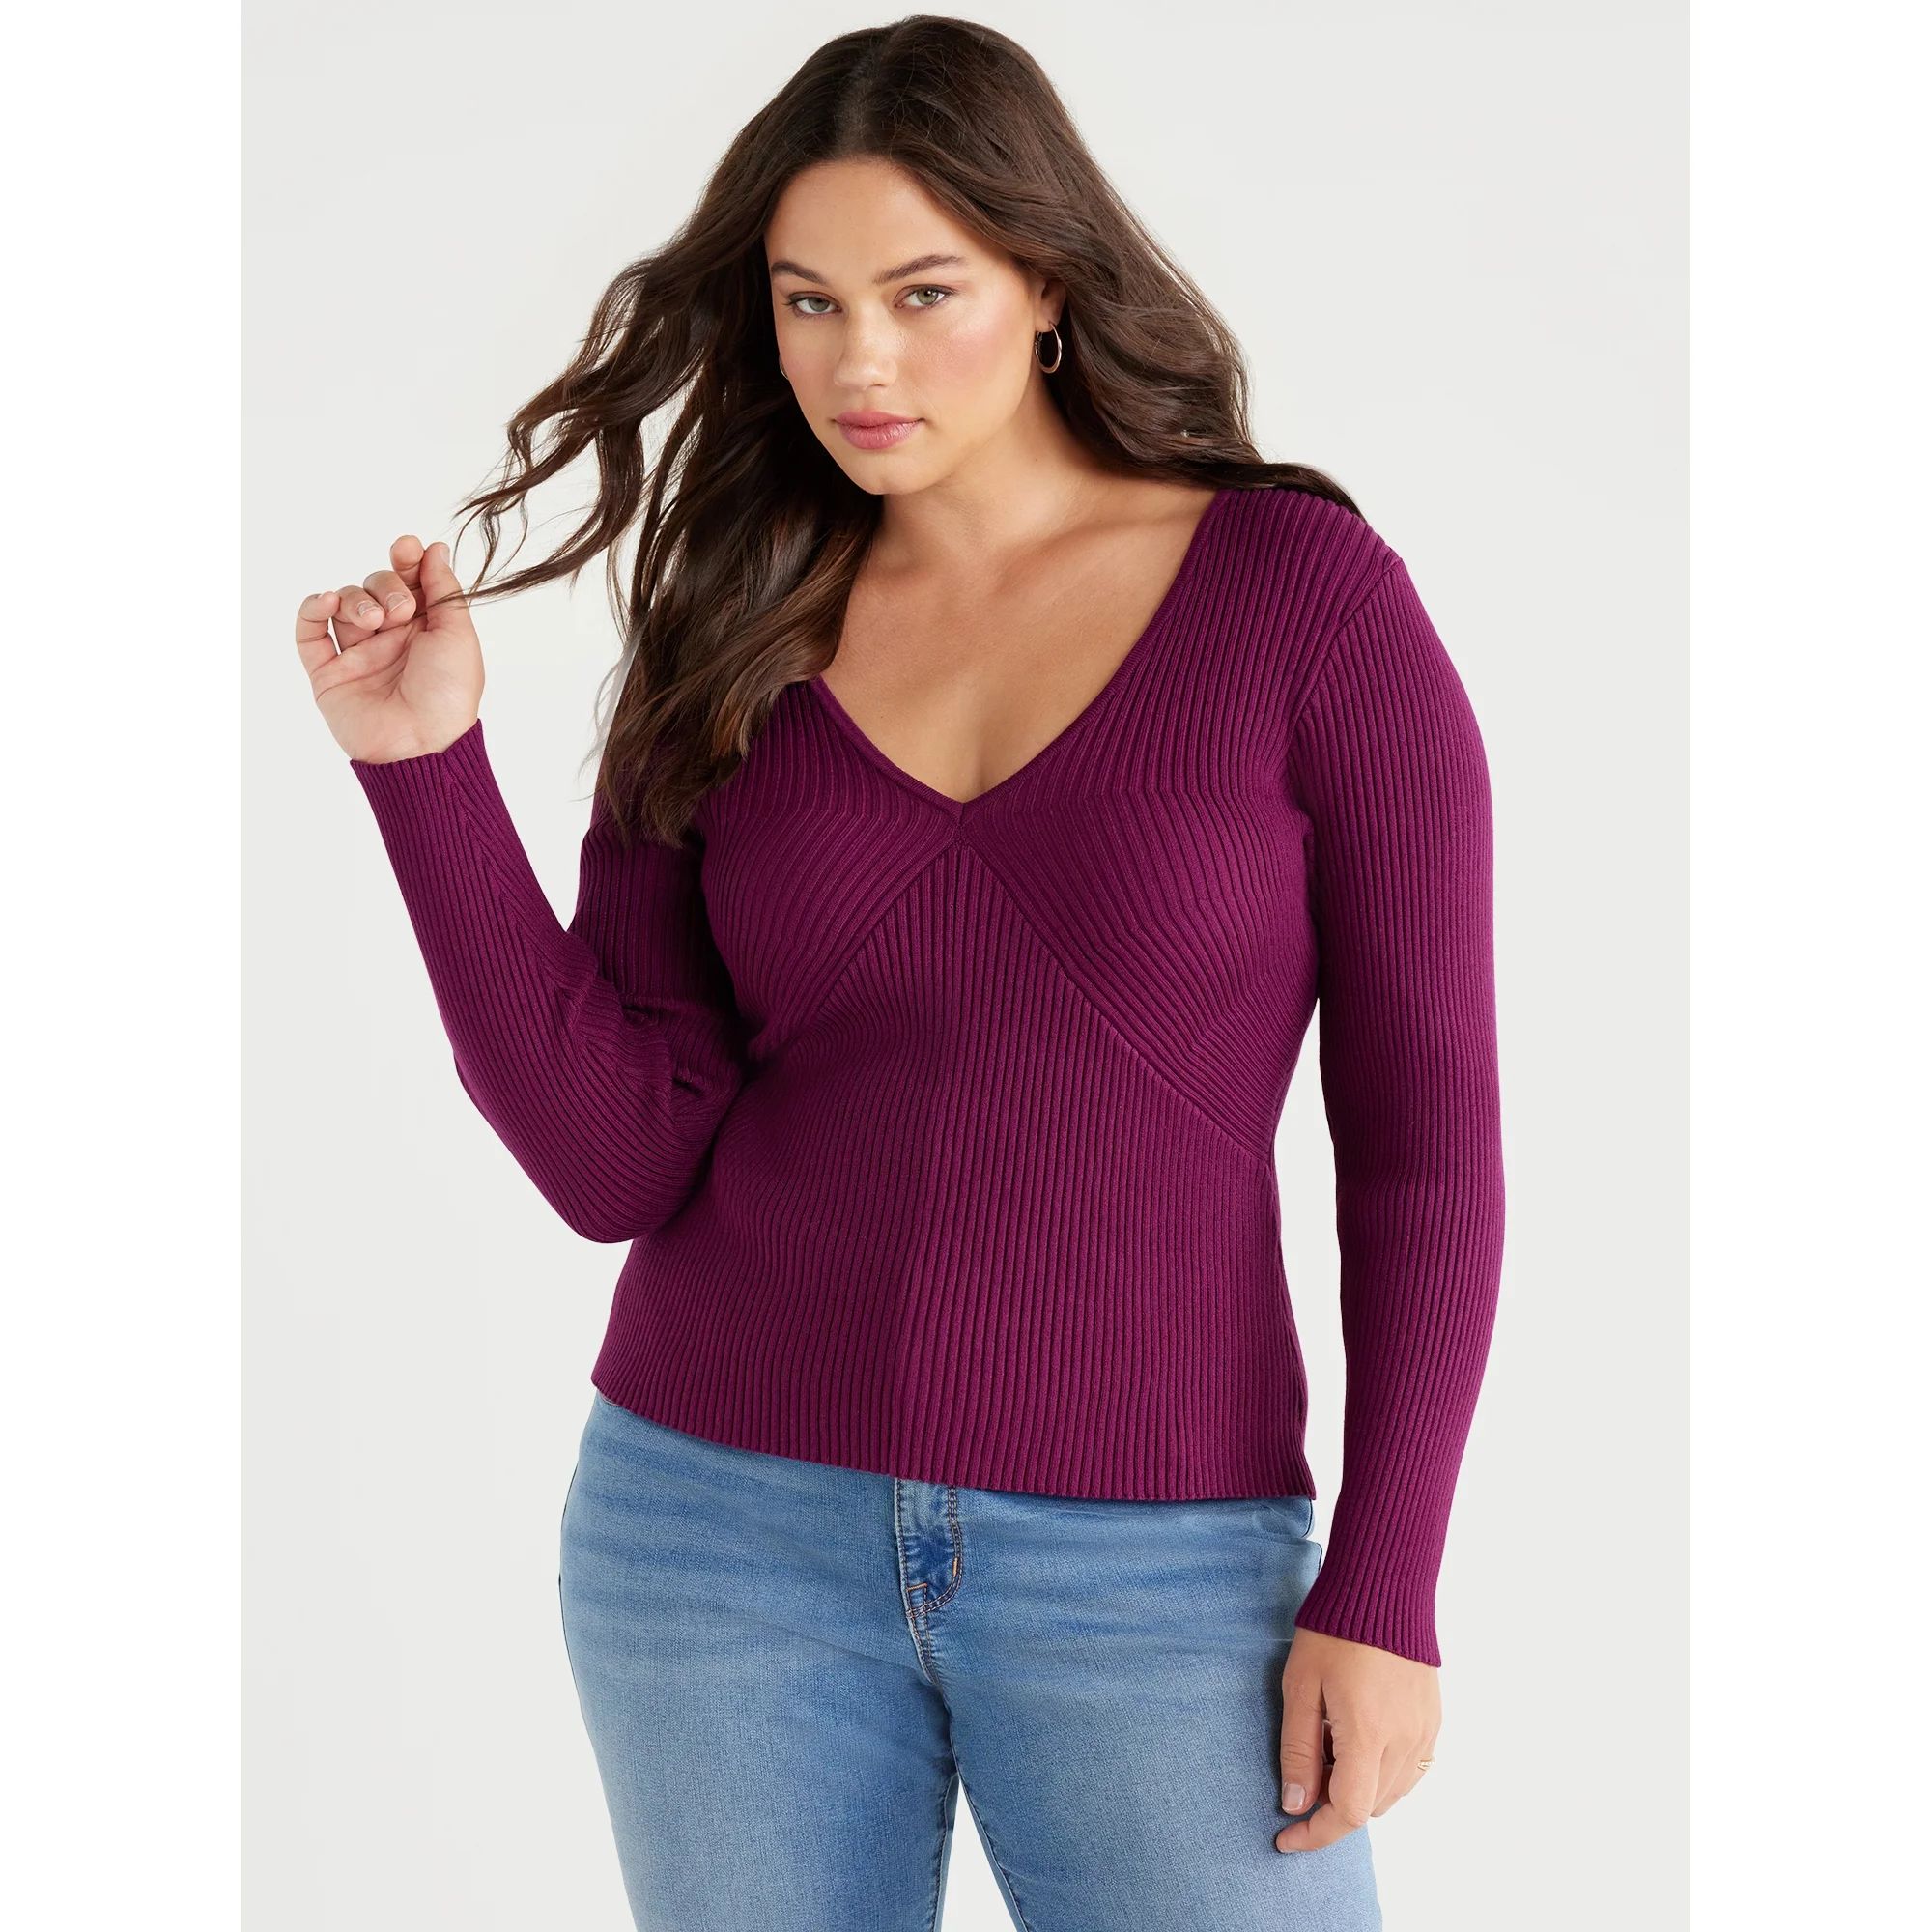 Sofia Jeans Women's Plus Size Ribbed Sweater with Long Sleeves, Sizes 1X-5X | Walmart (US)